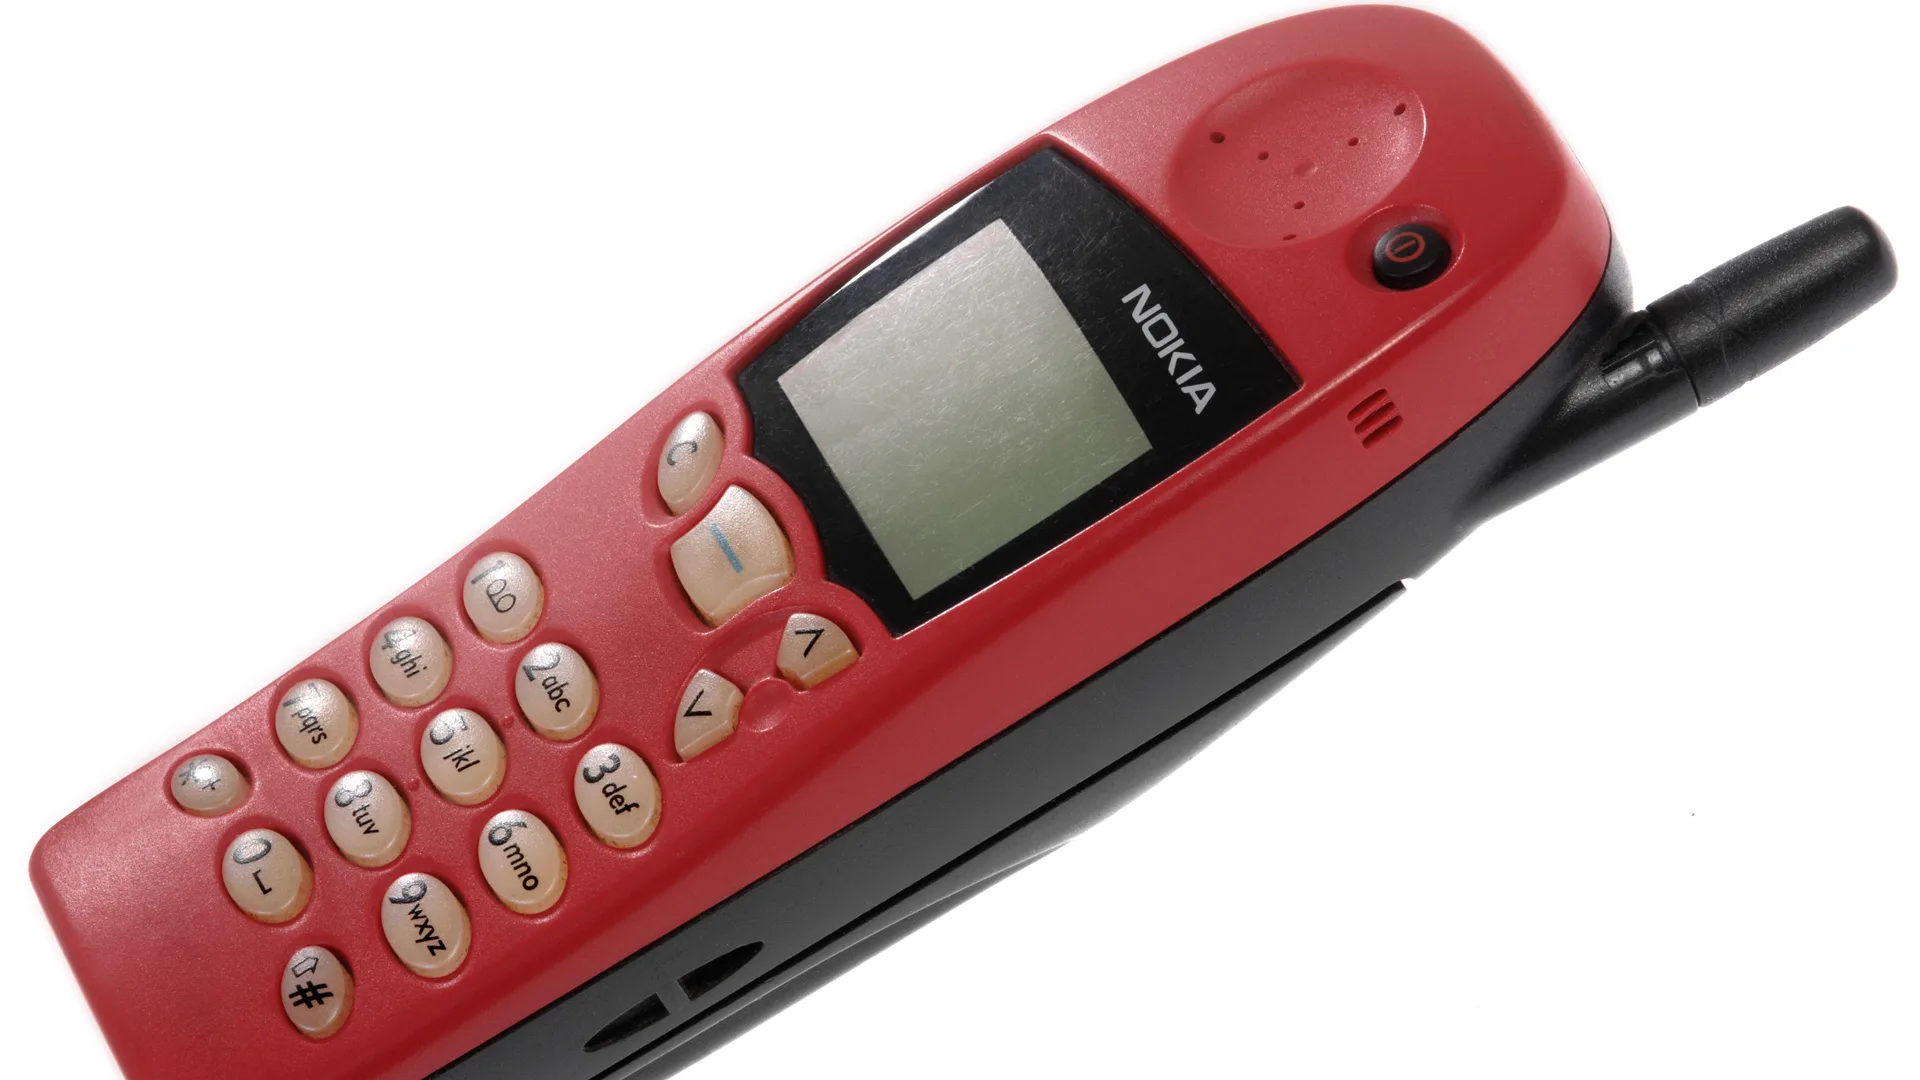 A photograph of the Nokia 5110 phone in red against a white background